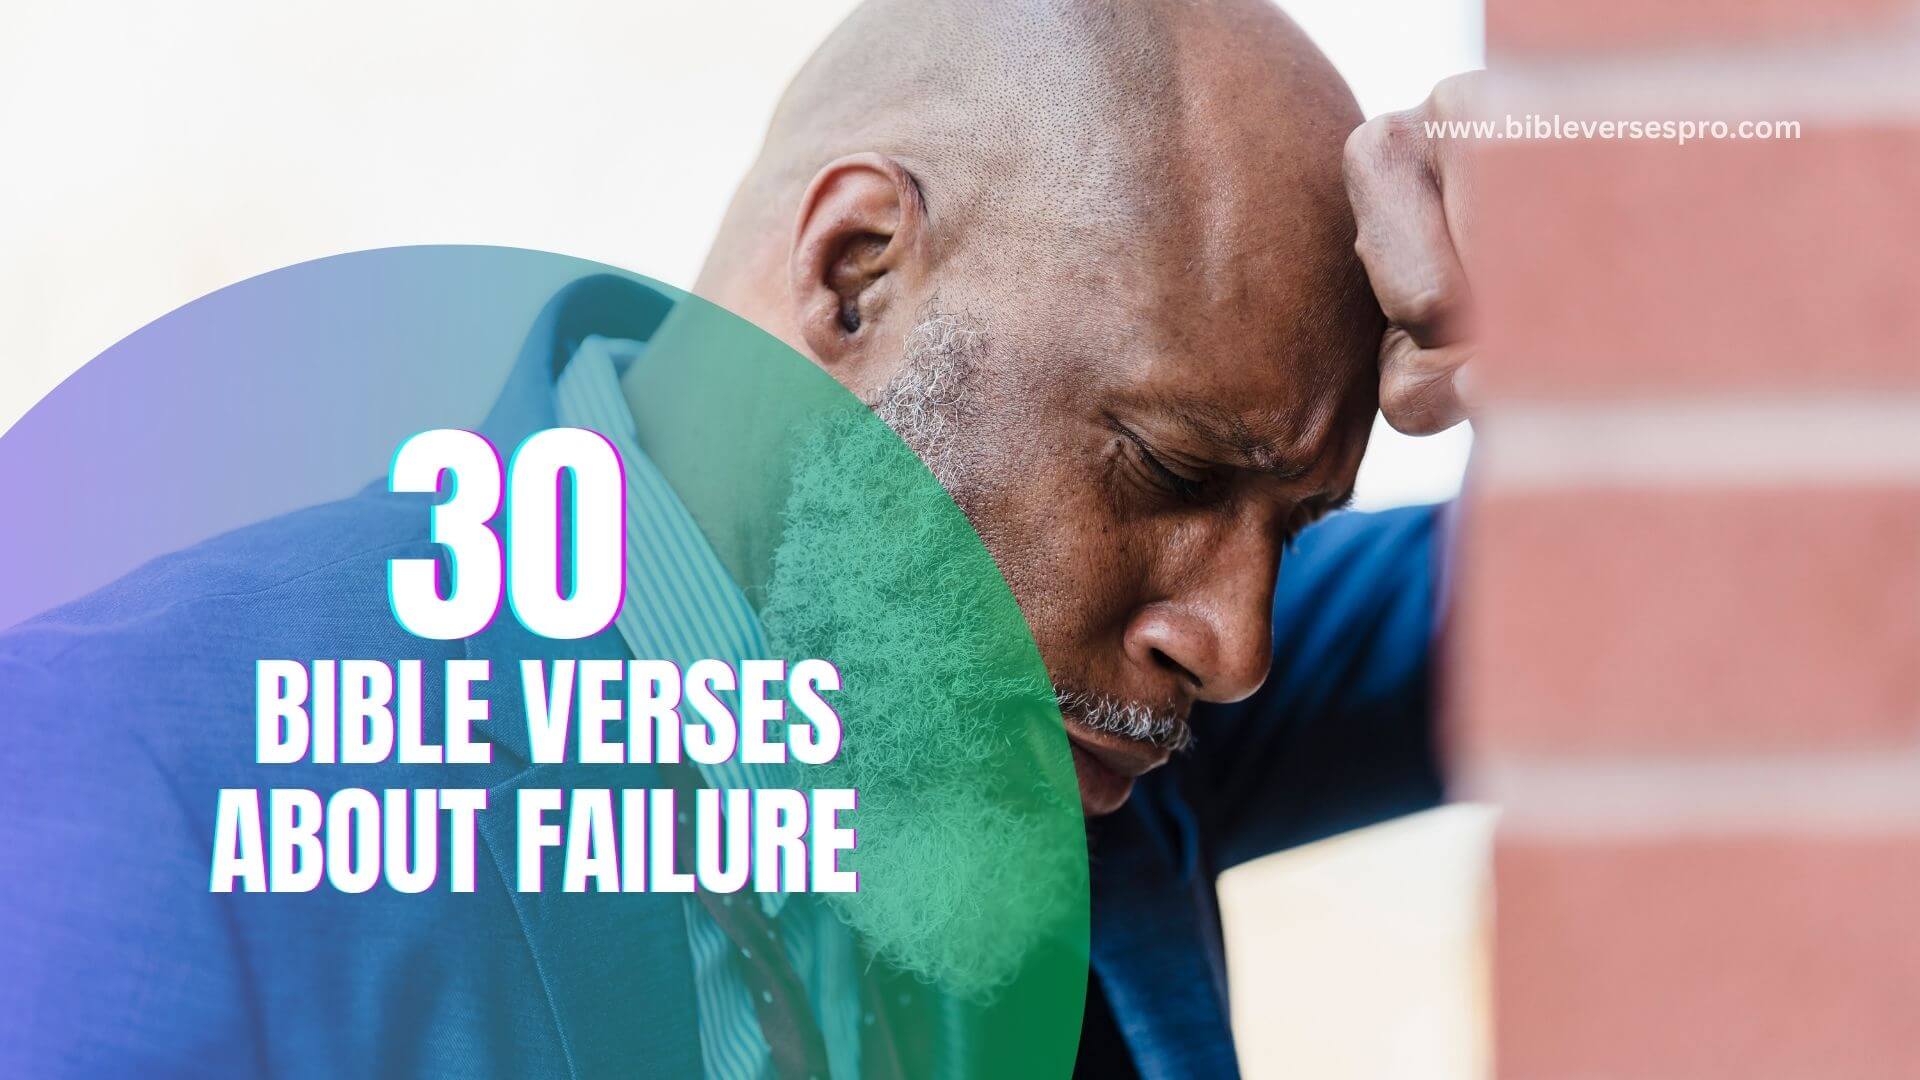 BIBLE VERSES ABOUT FAILURE (2)